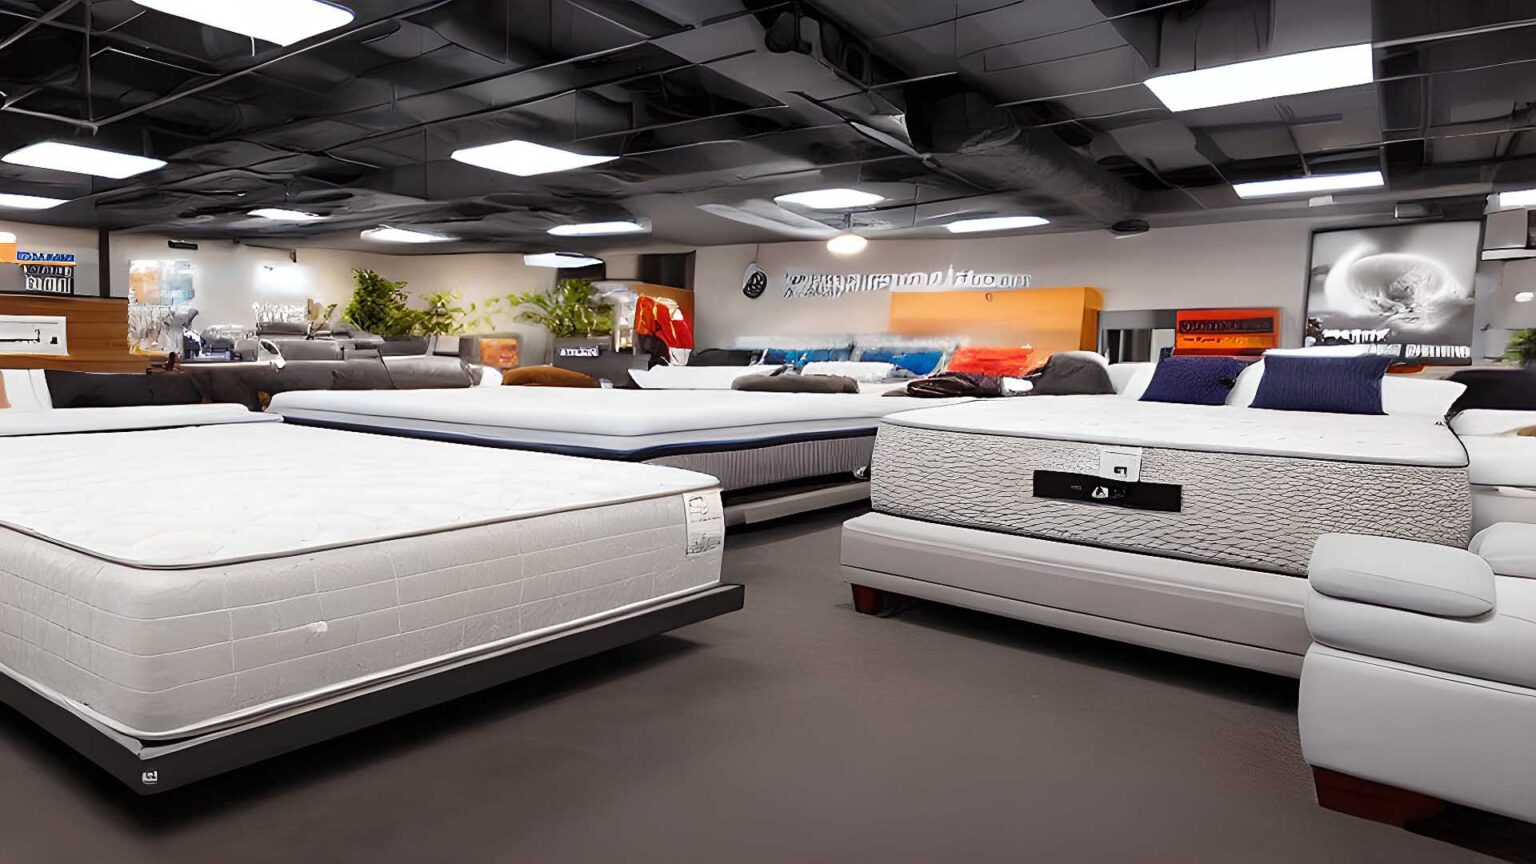 Mattress Stores, mattress dealers, and mattress retailers near me in Canyon Country, CA